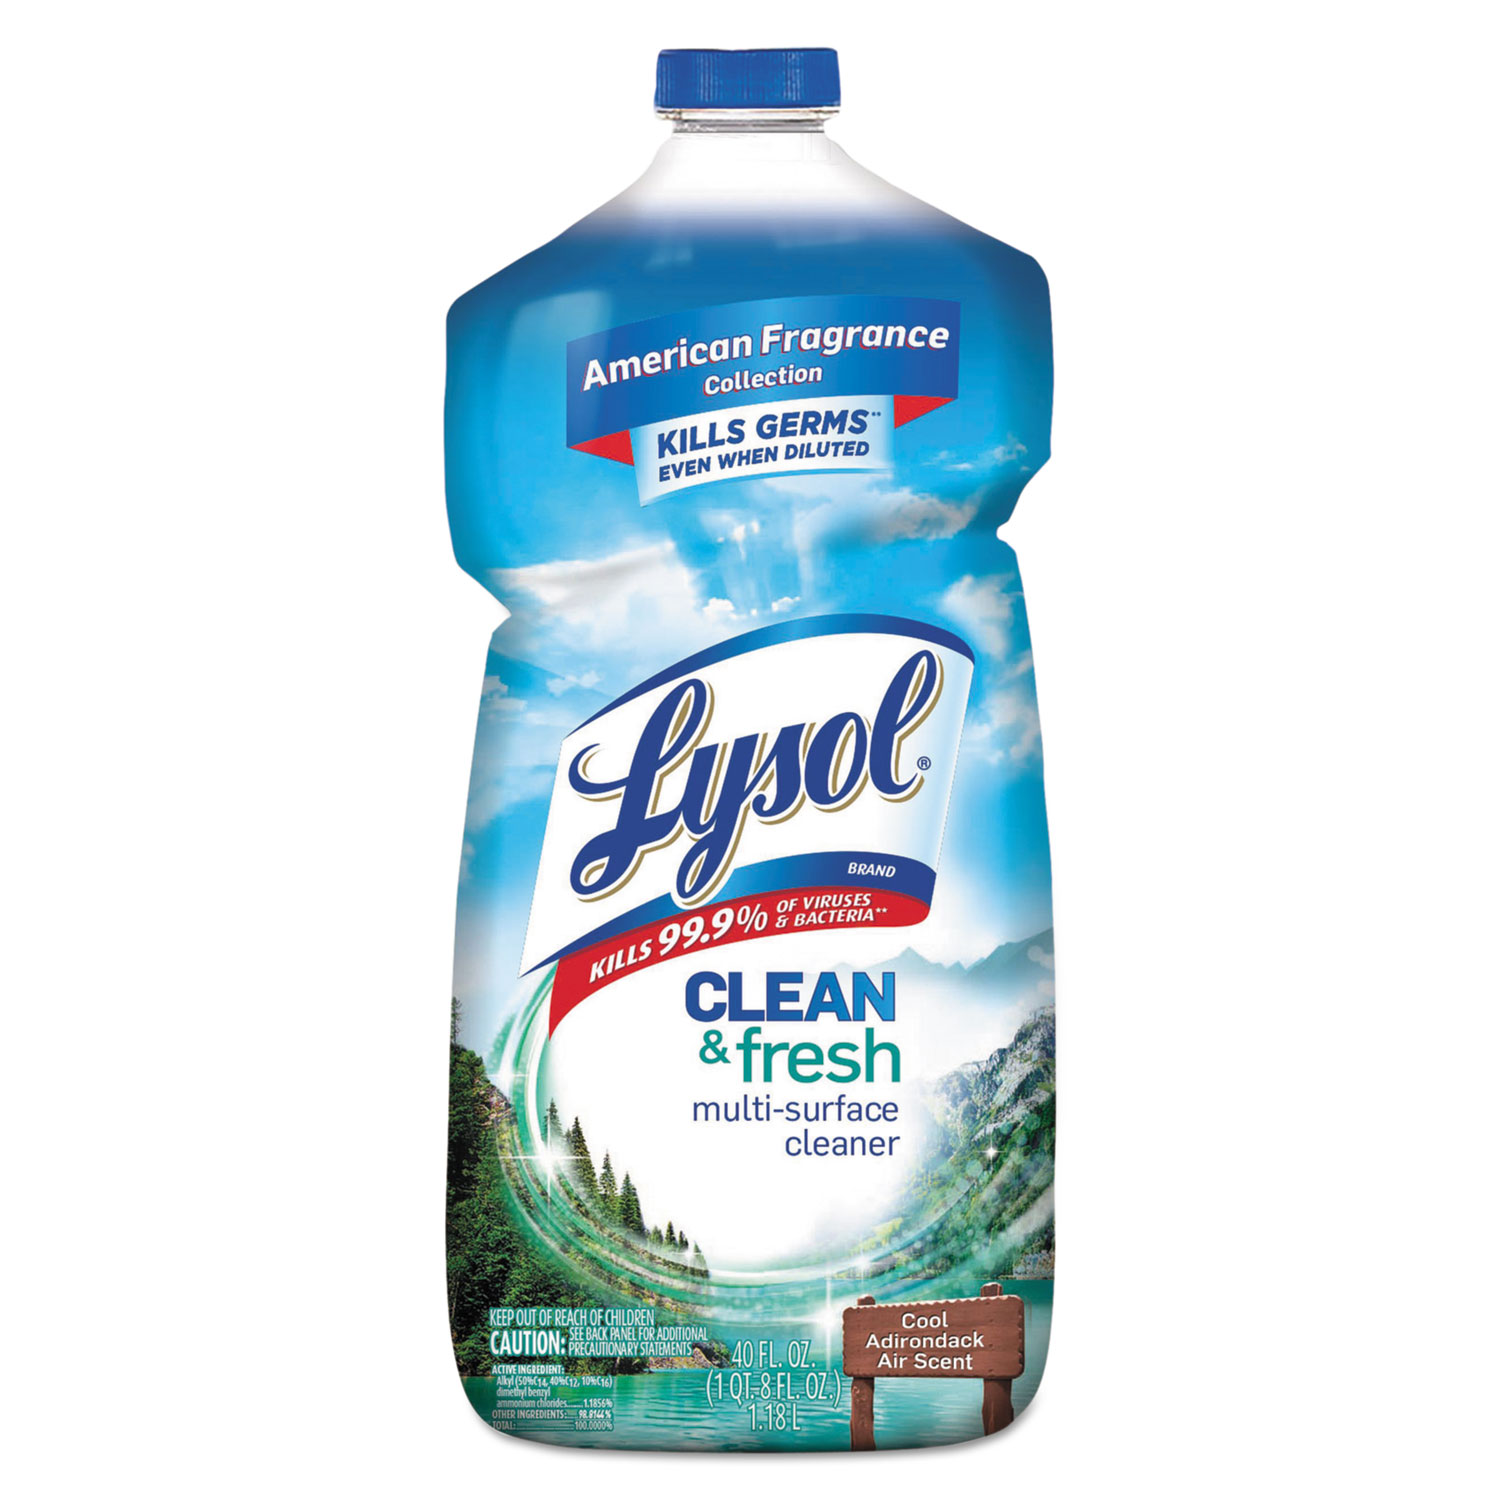  LYSOL Brand 19200-78630 Clean and Fresh Multi-Surface Cleaner, Cool Adirondack Air, 40 oz Bottle (RAC78630) 